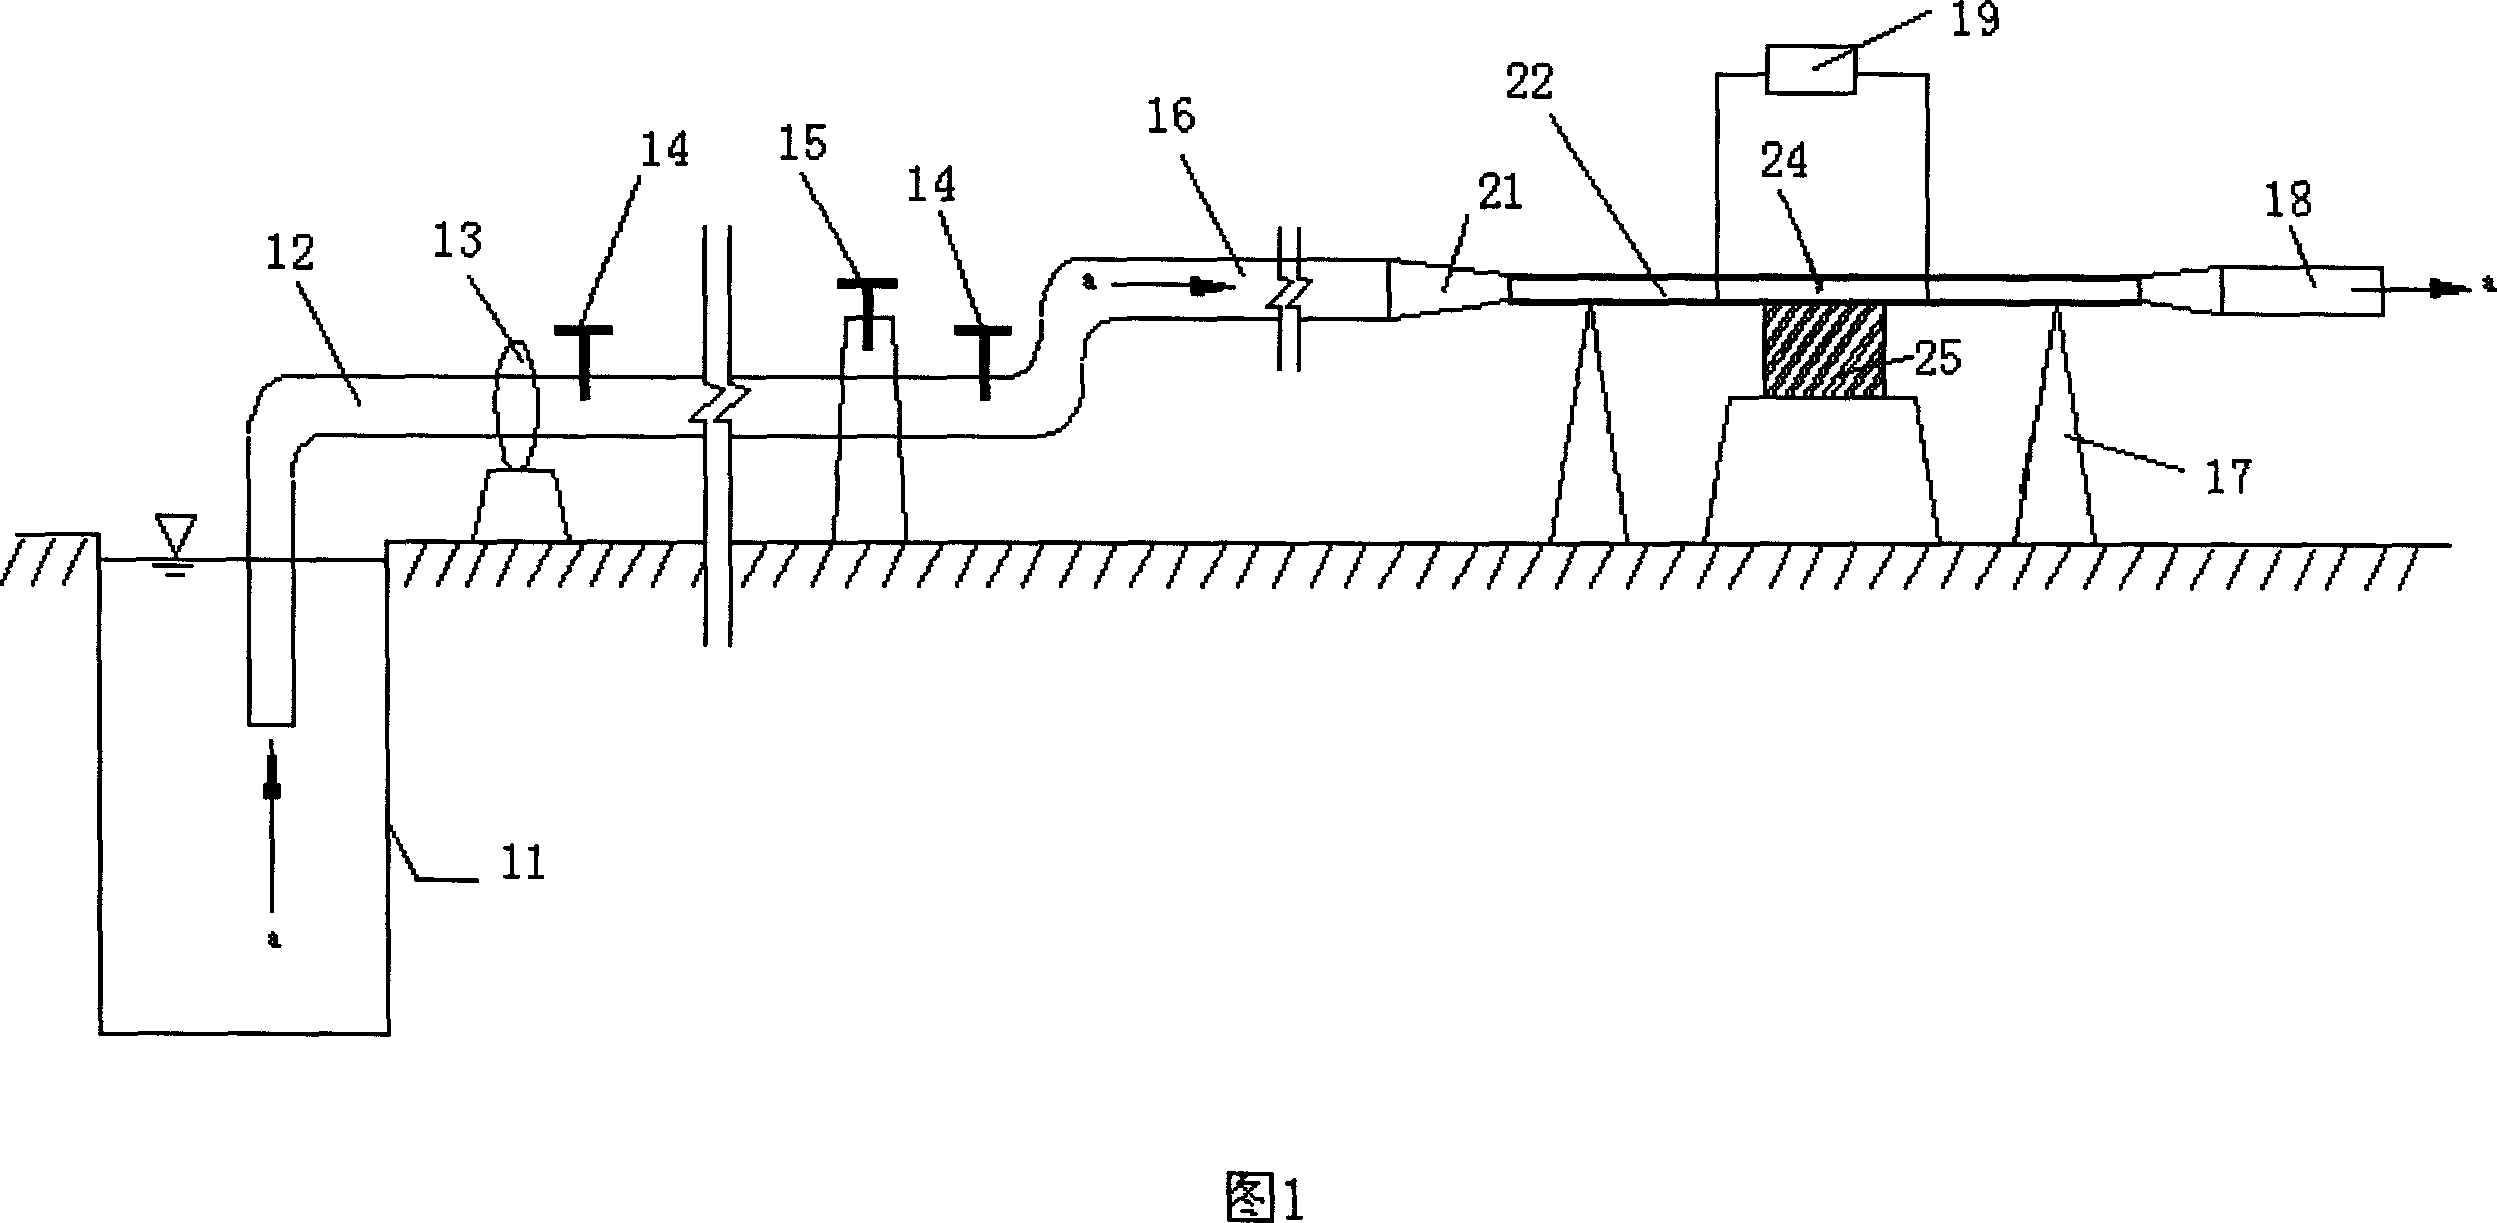 Experimental apparatus for determining runway lawn protection-slope impact-proof performance